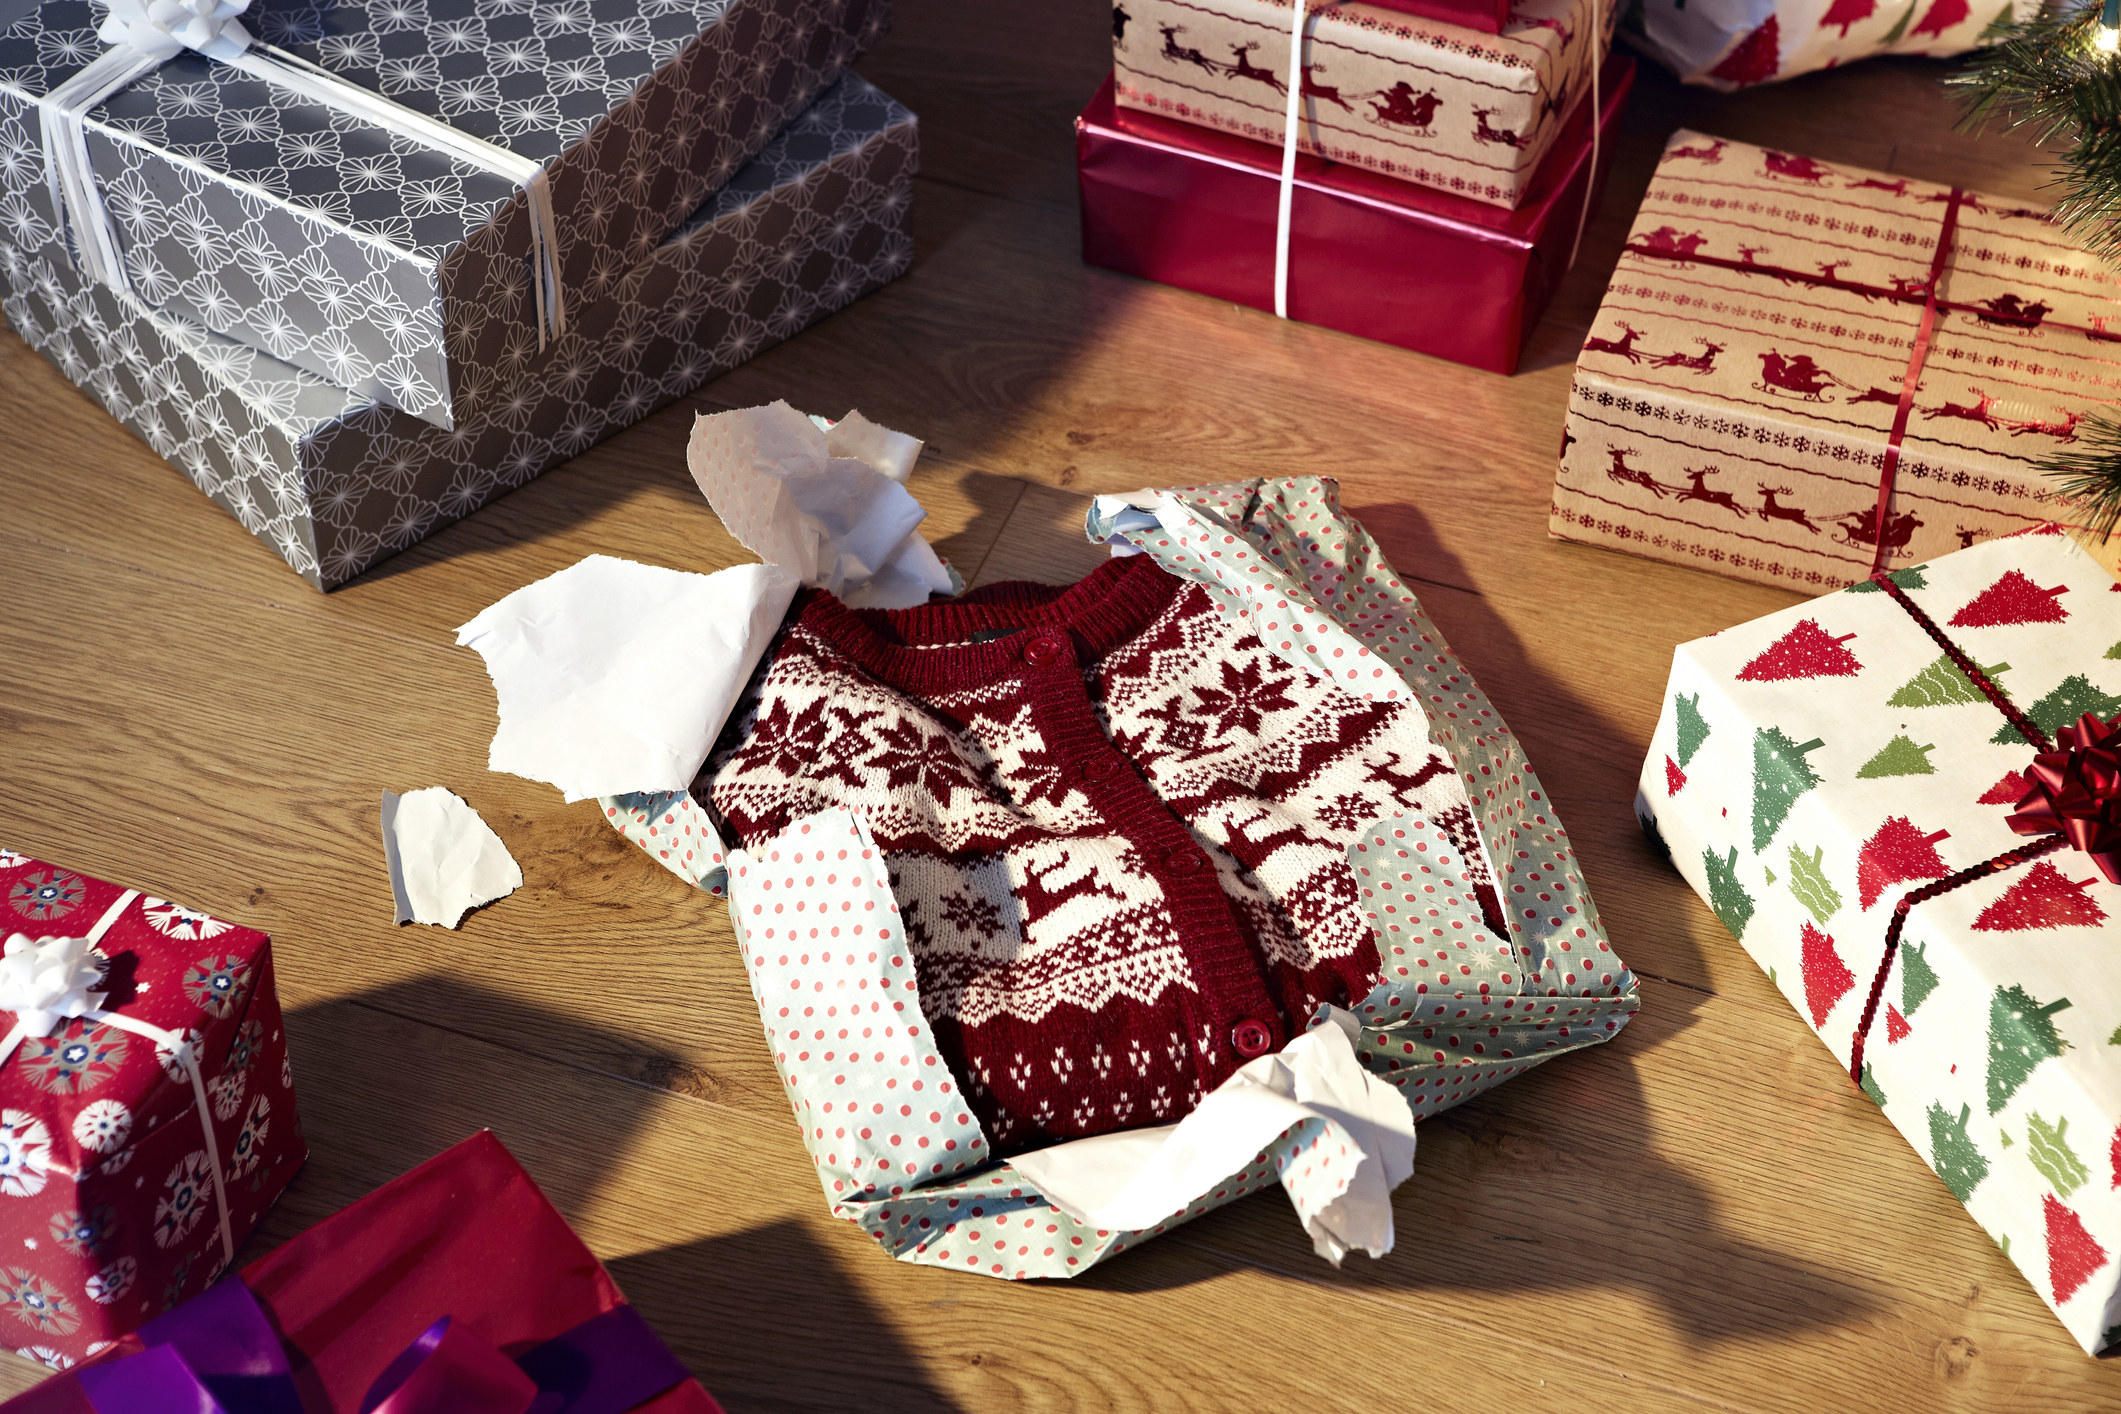 A holiday sweater partly opened in gift wrap